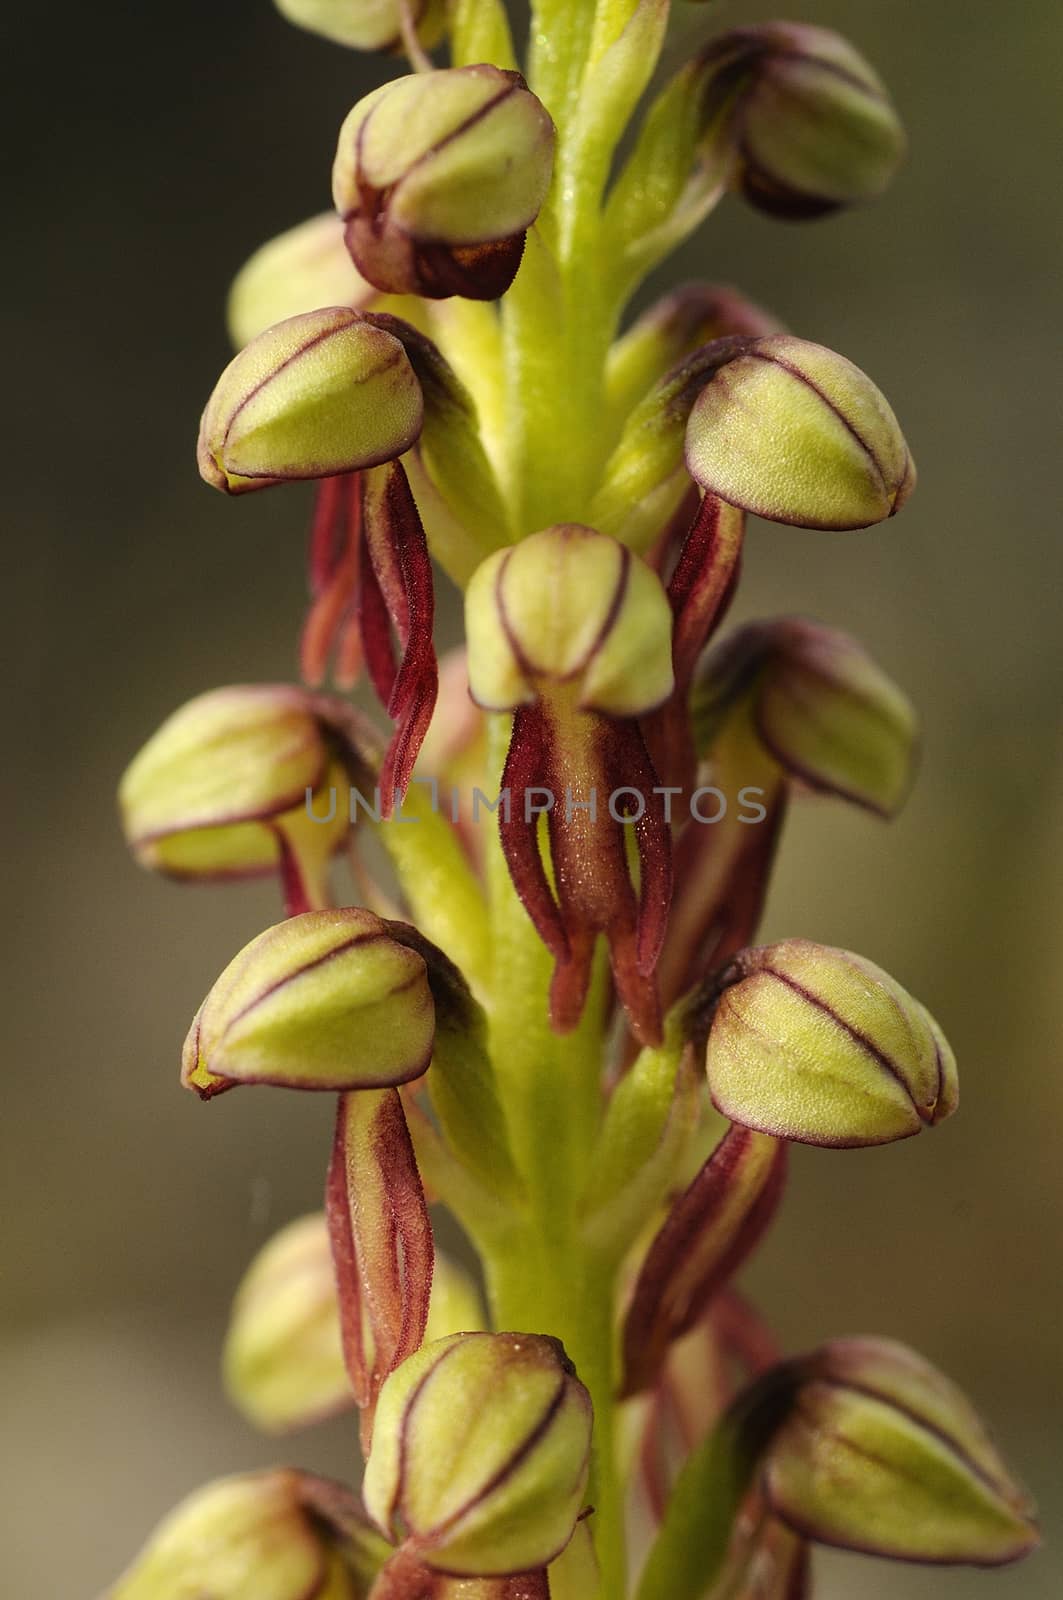 Wild orchid from southern Western Europe, Orchis anthropophora,  by jalonsohu@gmail.com